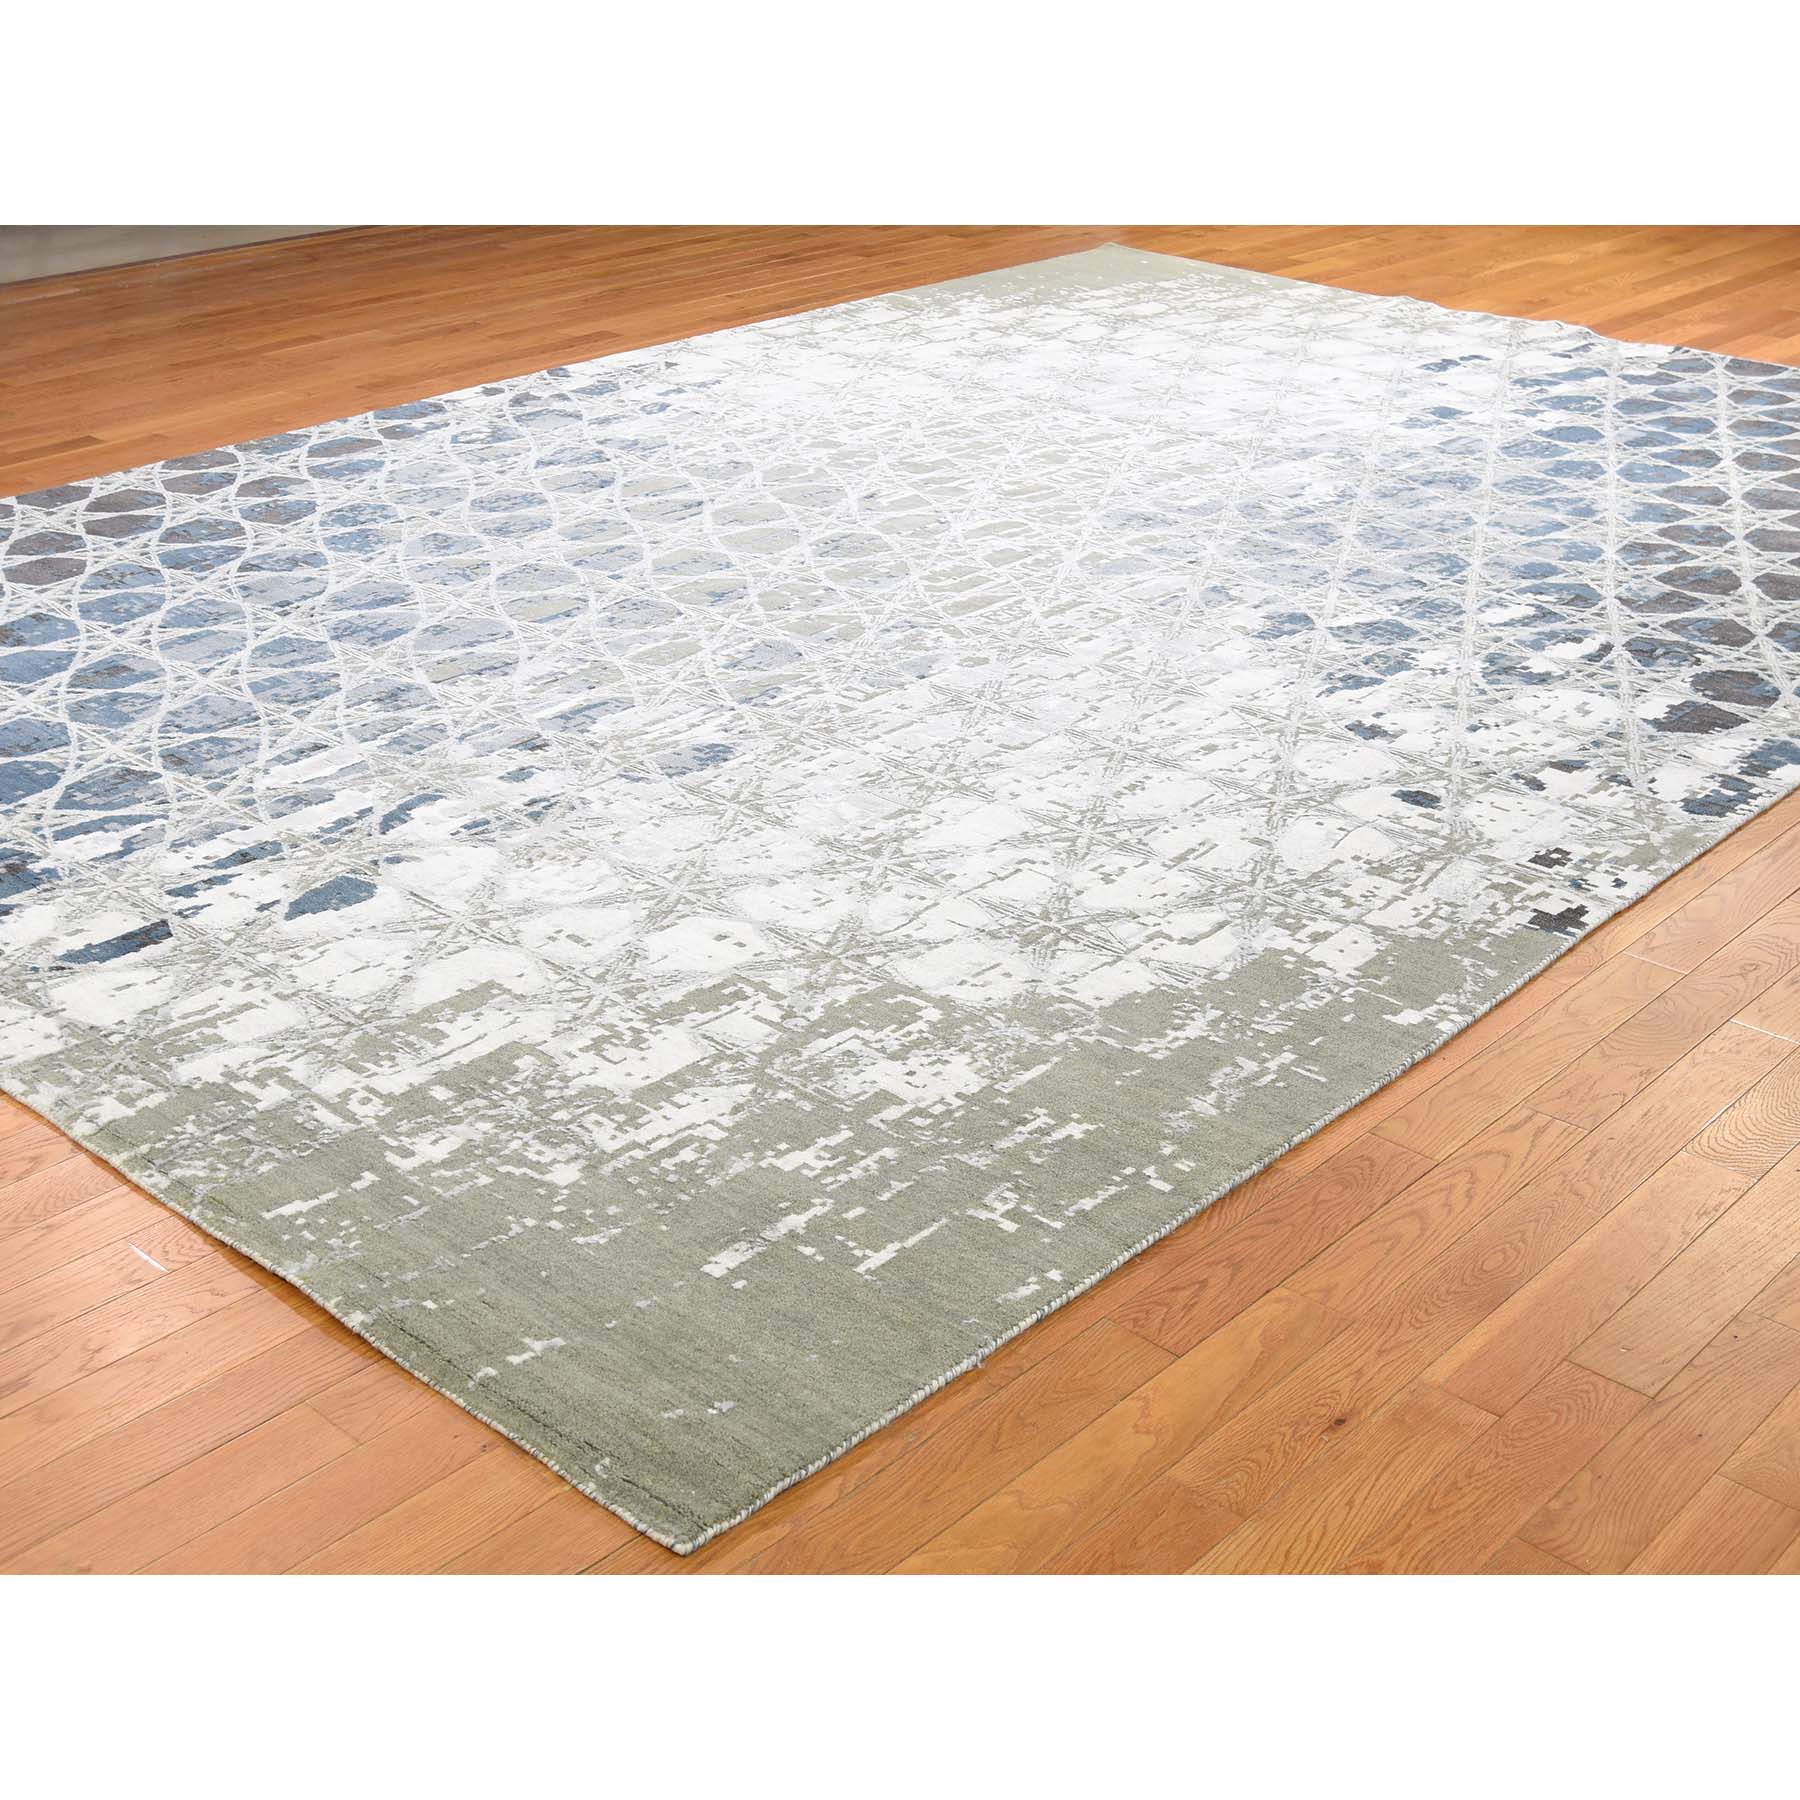 10-x14-1  THE HONEYCOMB Hand-Knotted Wool and Silk Award Winning Design Oriental Rug 